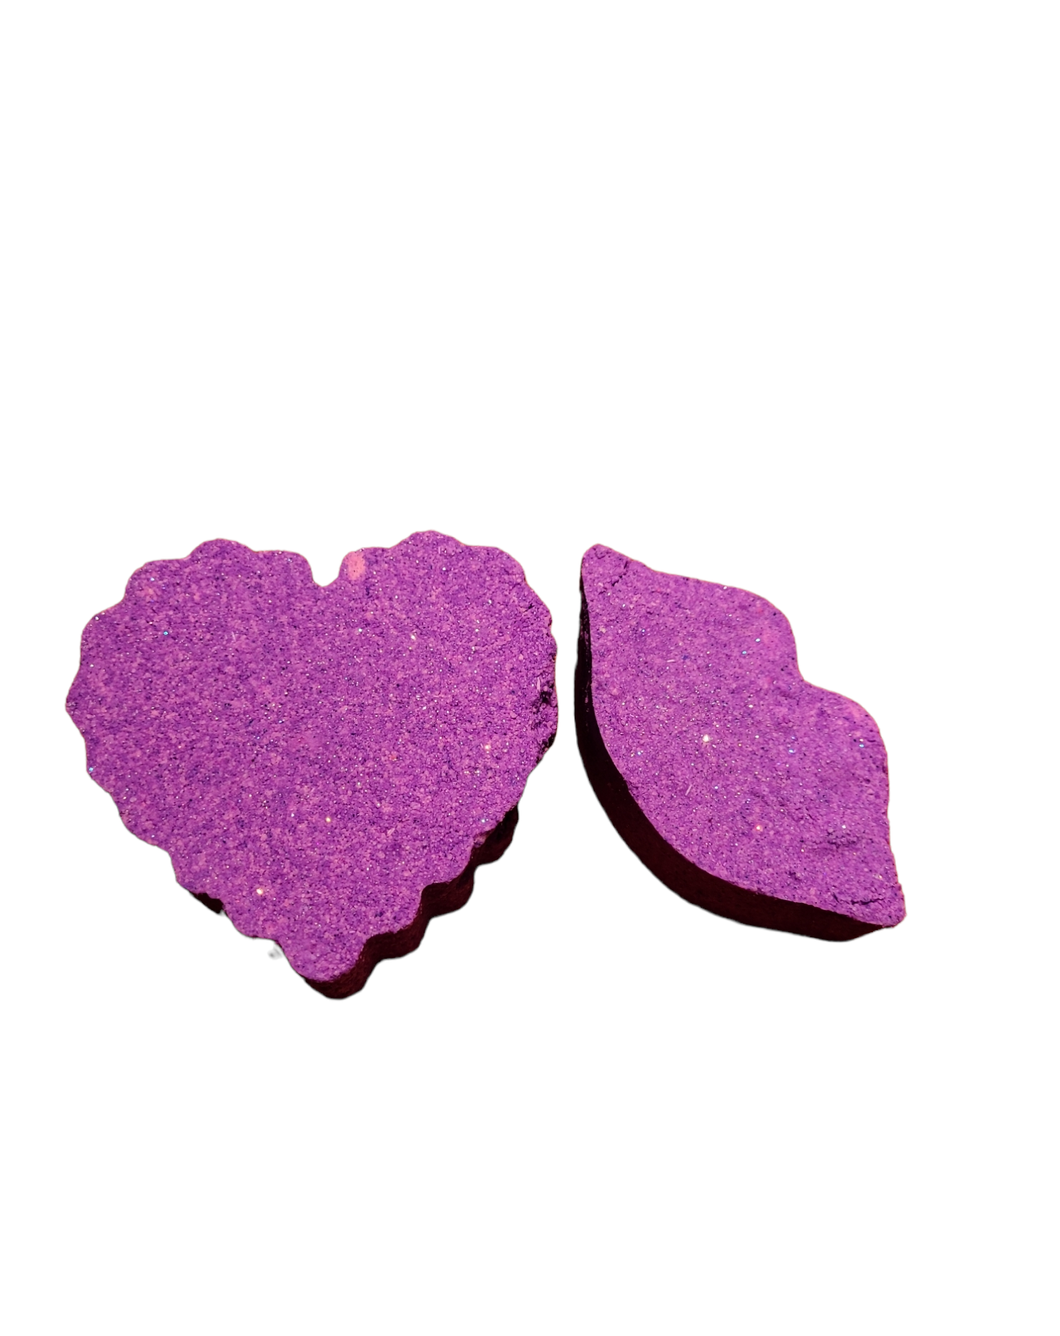 Leave your skin feeling silky soft with these limited-edition bubble bars and bath bombs. The moisturizing formula creates a luxuriously thick foam that gently cleanses and moisturizes your skin, while the soft, foam bubbles give you a luxurious bath experience. Simply add to running water to release the delicate foam bubbles and enjoy a relaxing soak in the tub.